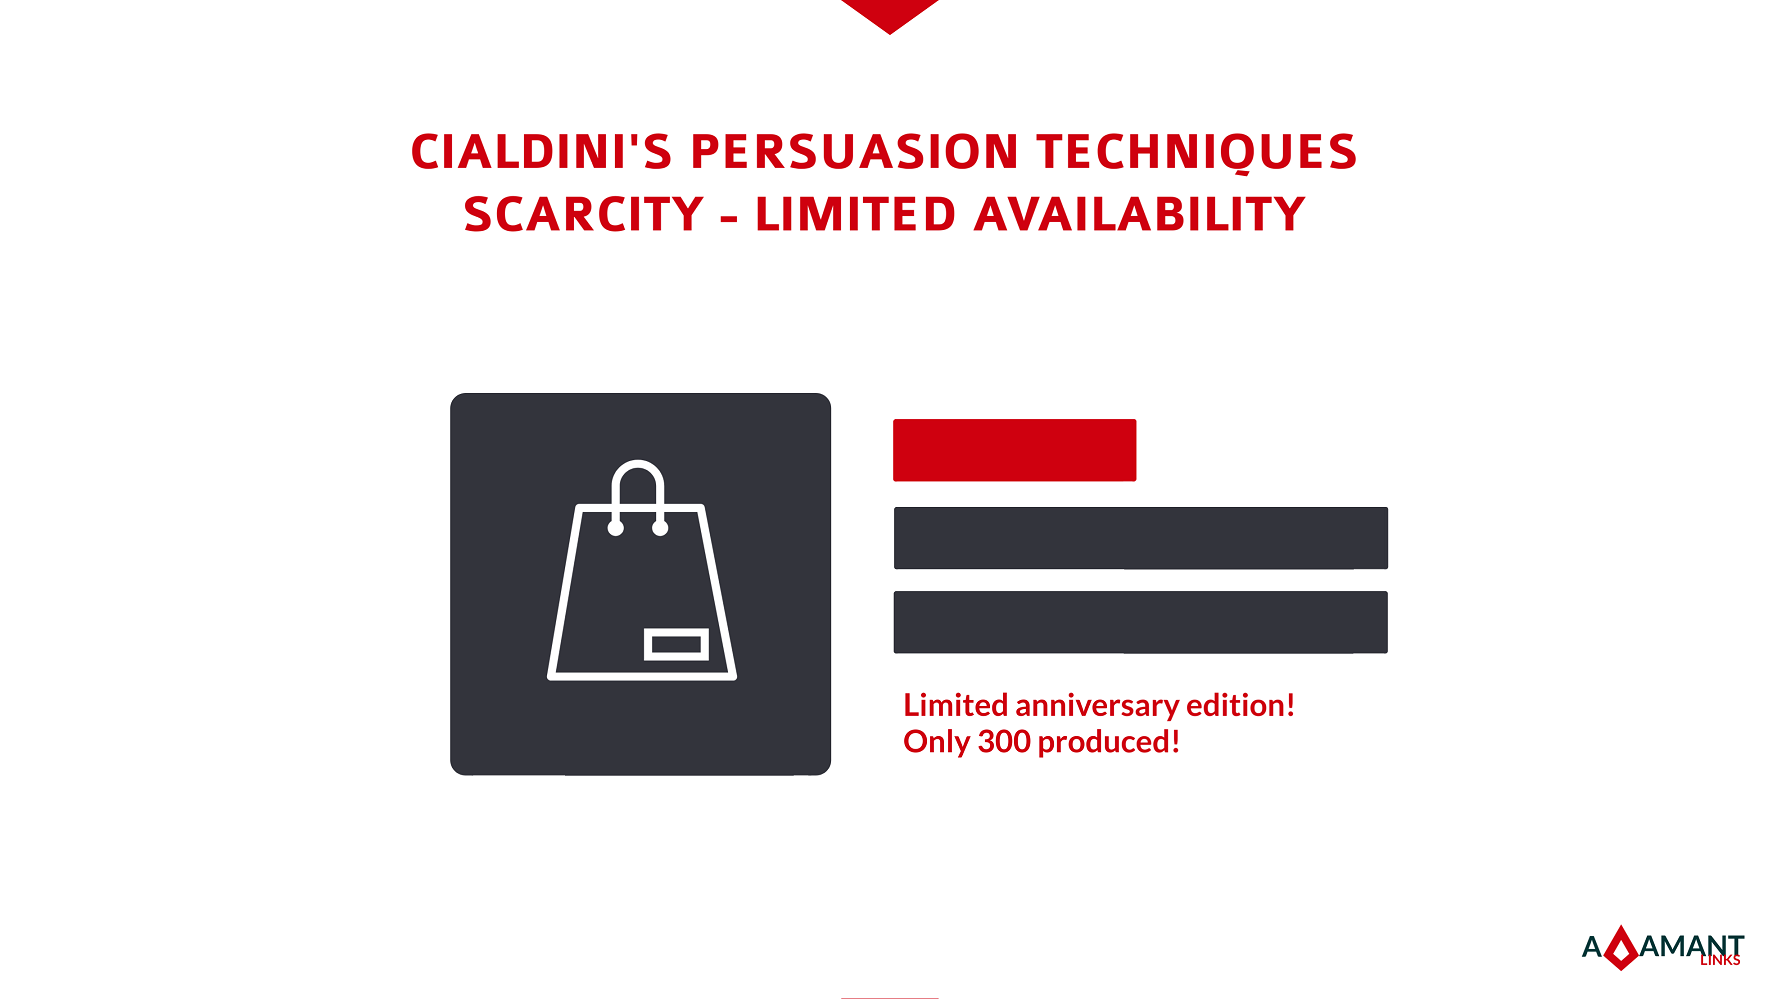 Adamant Links - Cialdini's Persuasion Techniques - Scarcity: Limited Availability